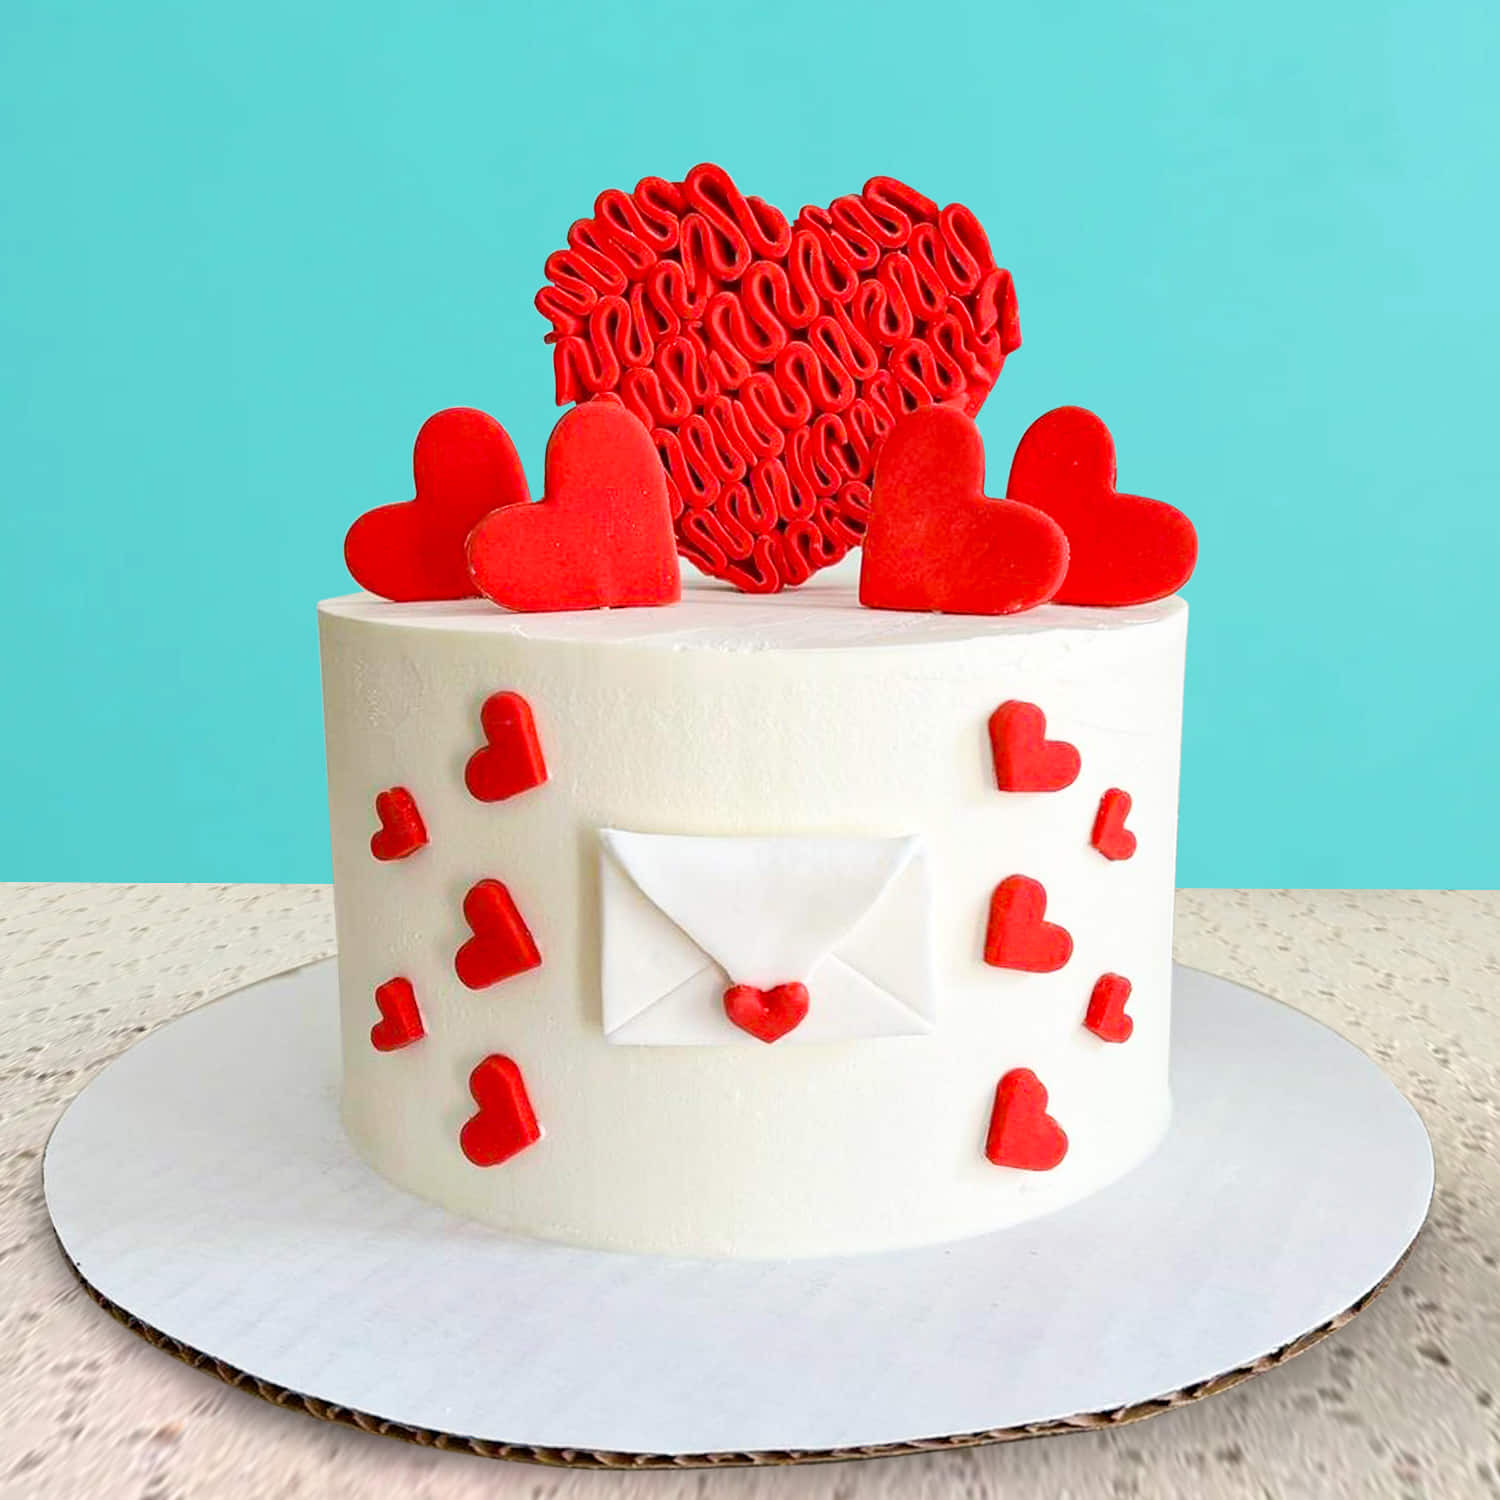 Best HEART Cake Decorating Ideas for Your Love | Easy Cake Decorating  Tutorials by So Easy - YouTube